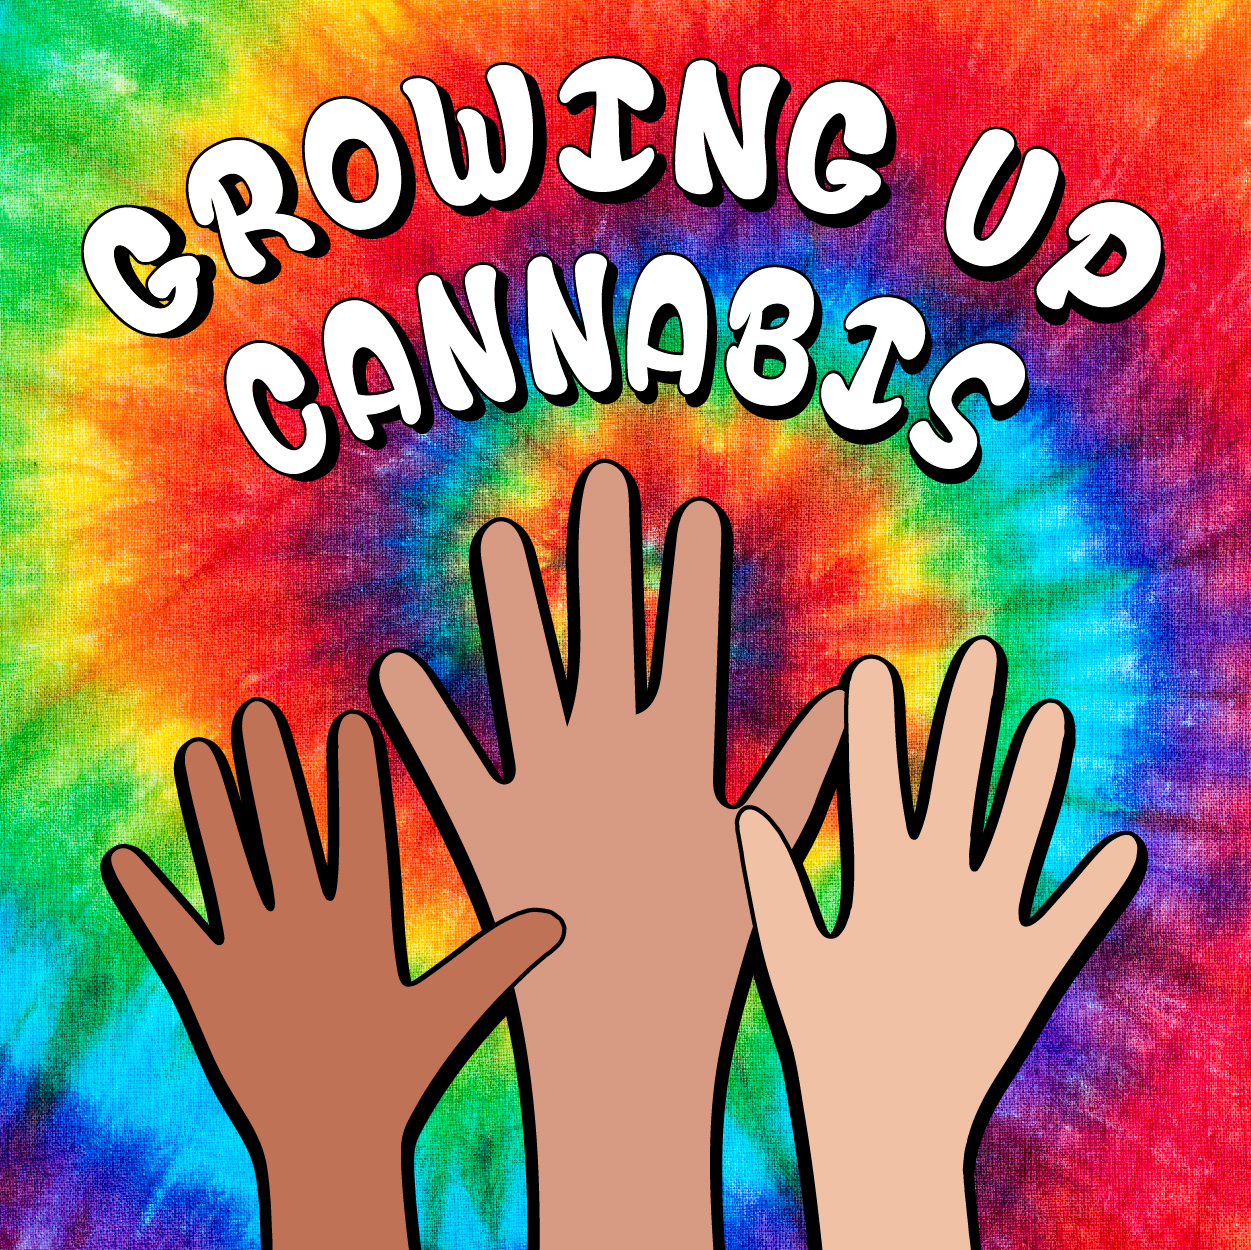 Growing up cannabis